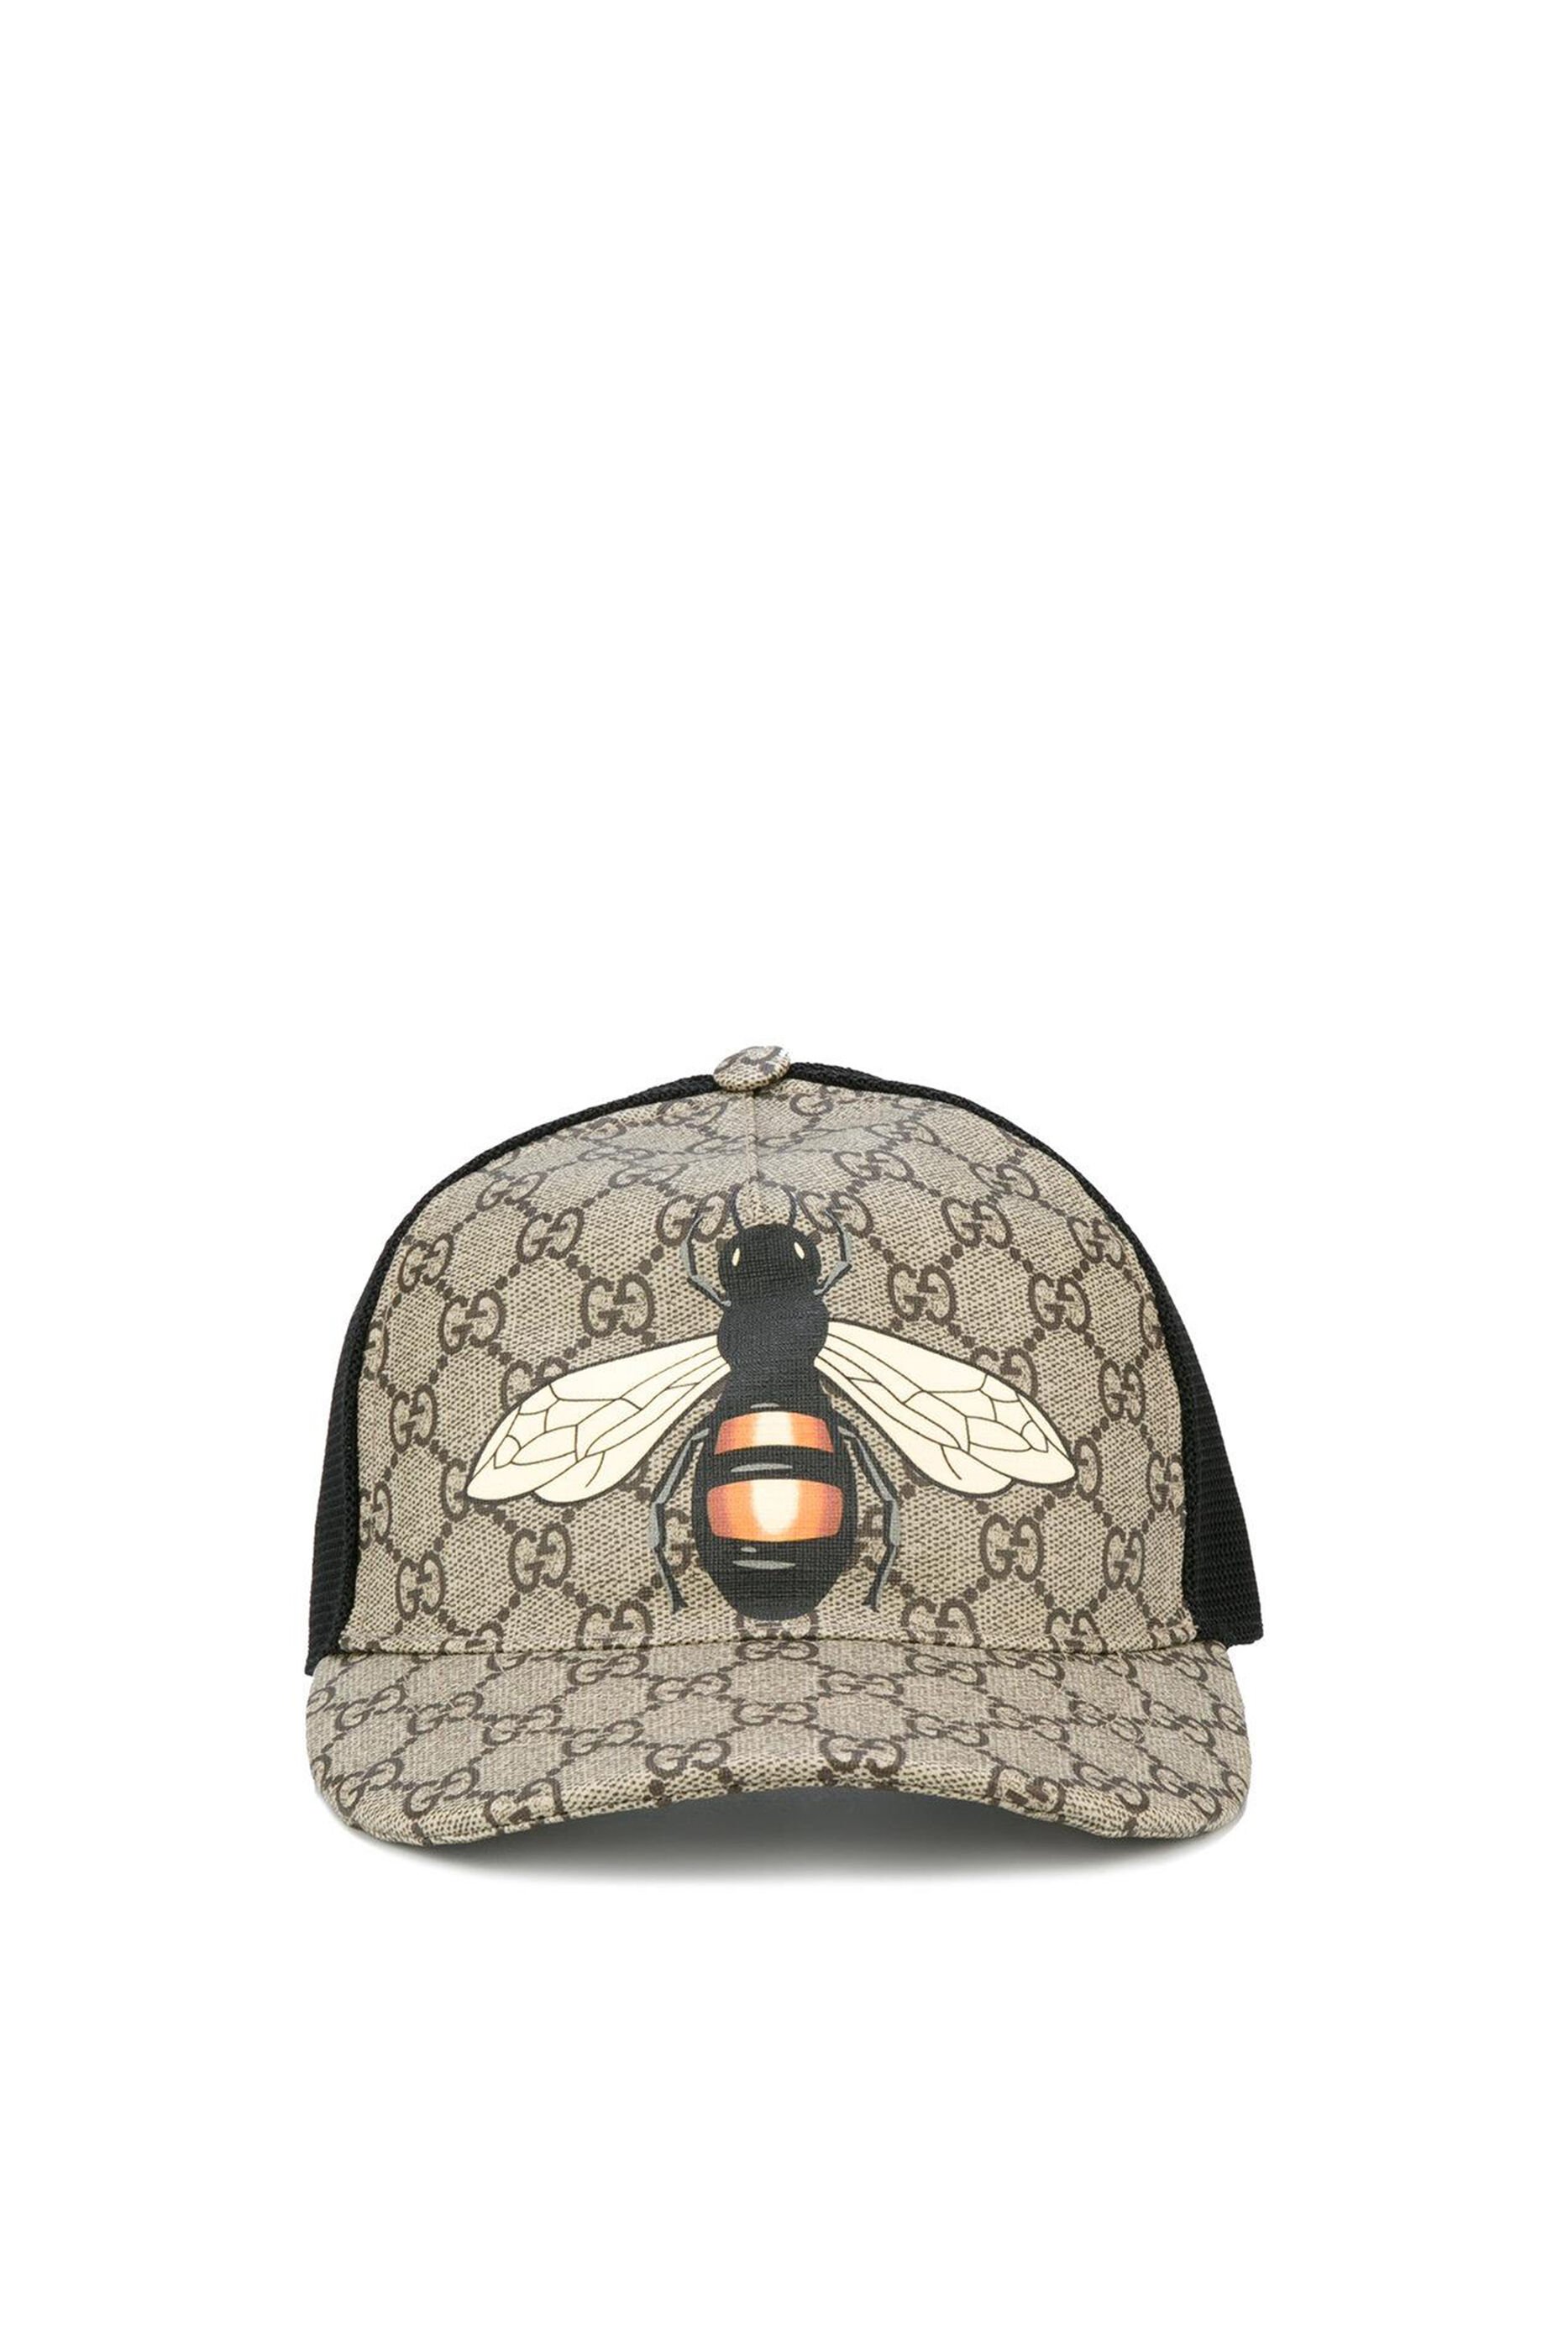 gucci hat with bee